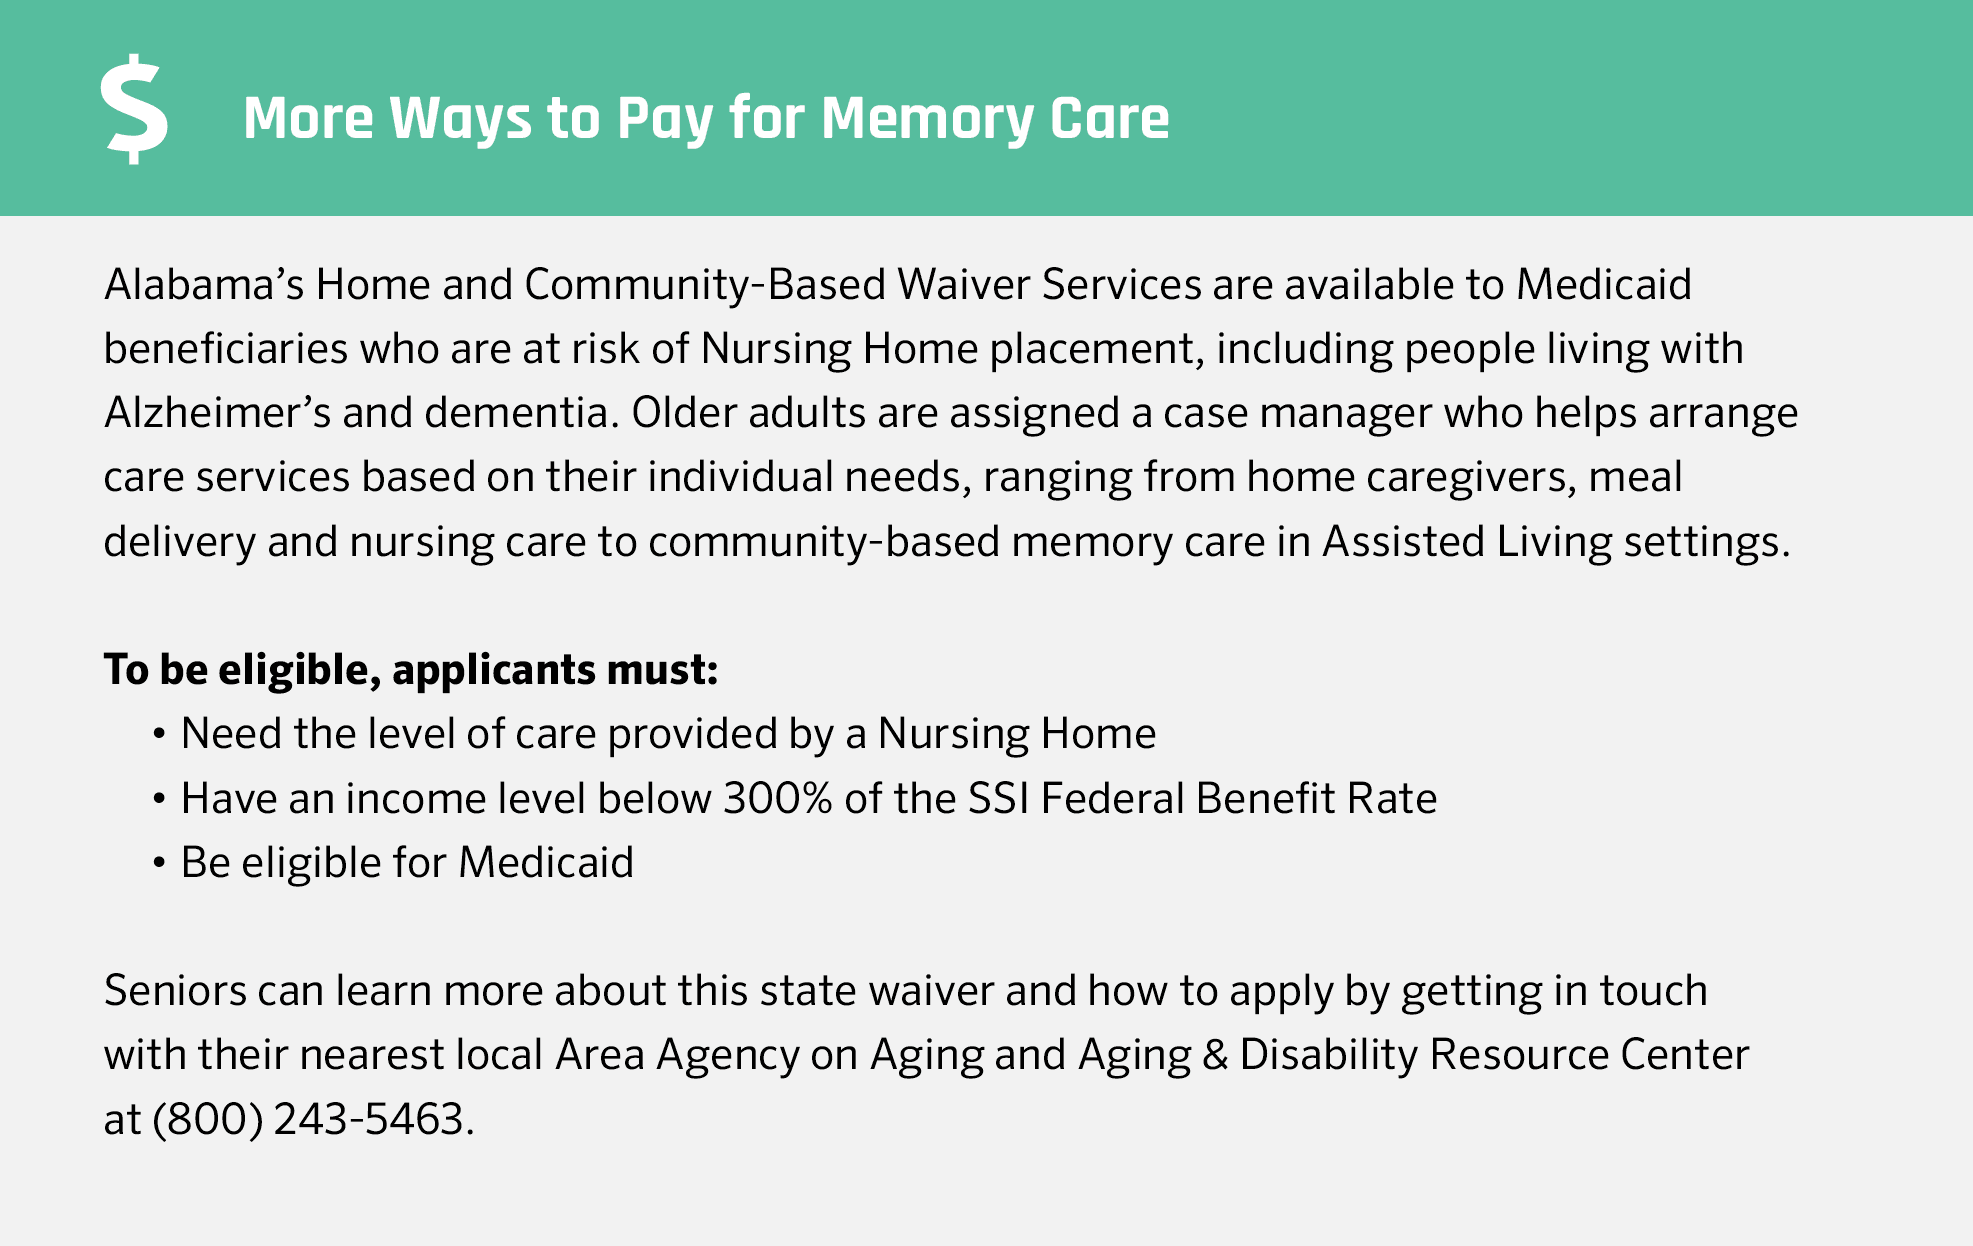 More ways to pay for memory care in Alabama